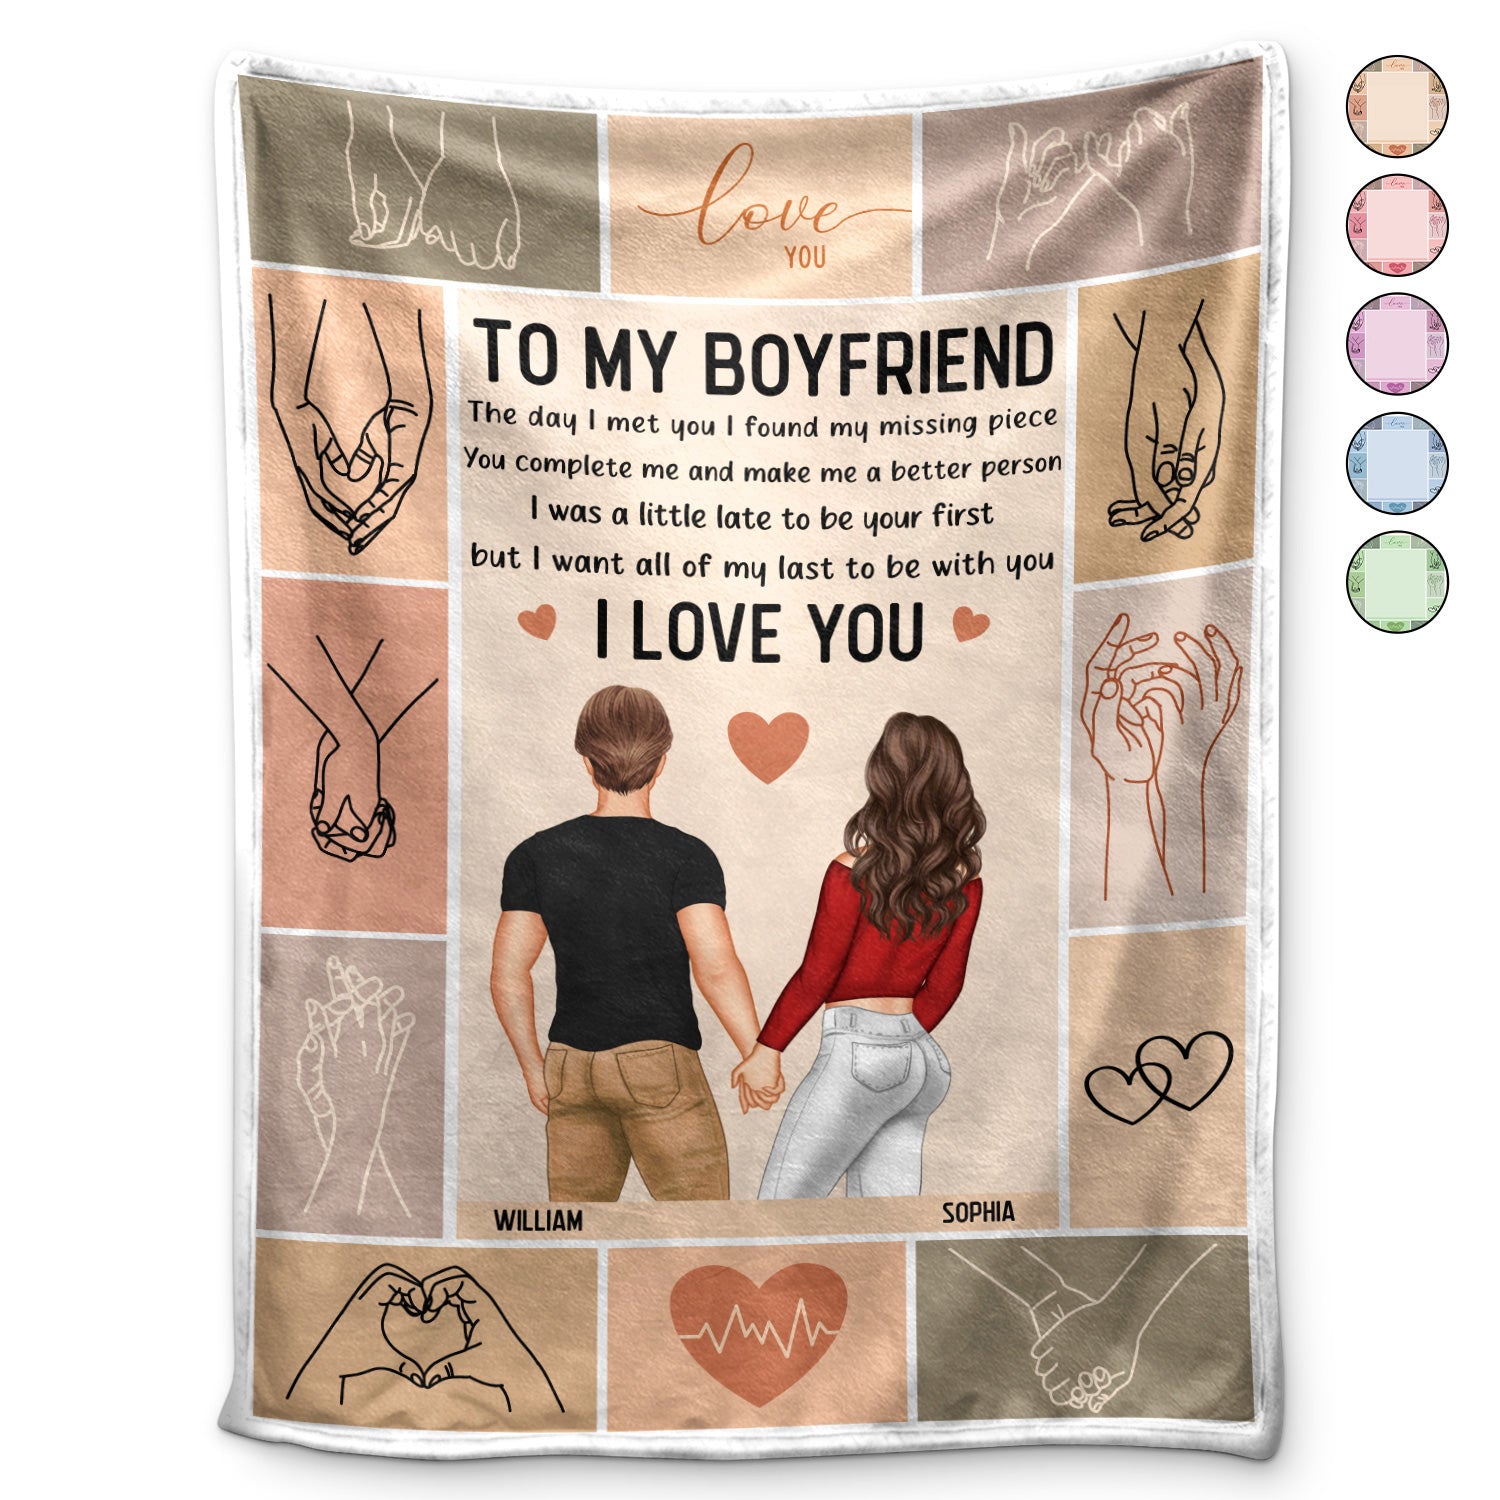 I Want All Of My Lasts To Be With You Couple Holding Hands - Loving, Anniversary Gift For Spouse, Husband, Wife - Personalized Fleece Blanket, Sherpa Blanket